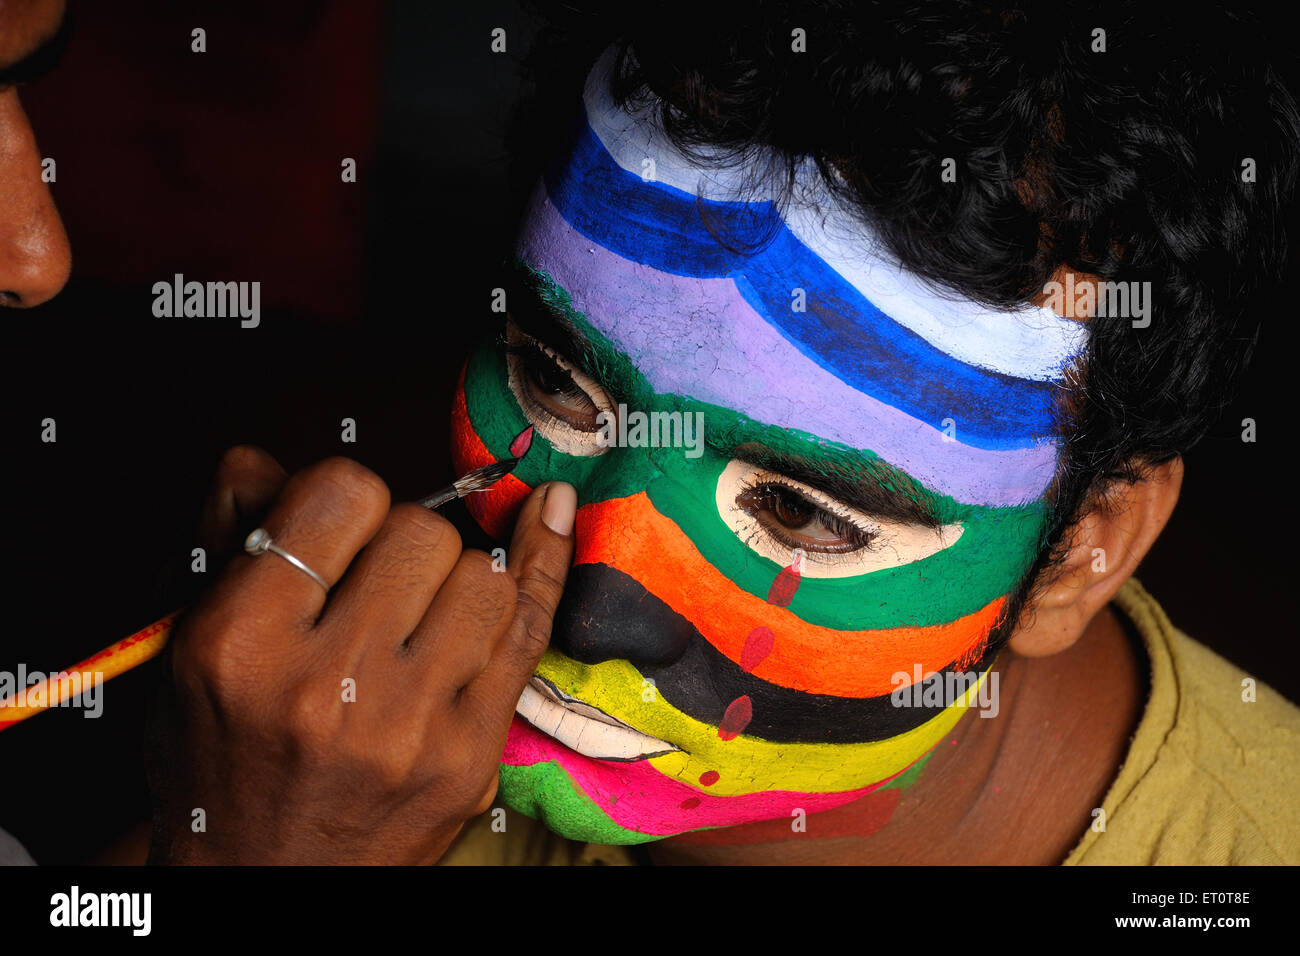 Painted face of man MR#769G Stock Photo